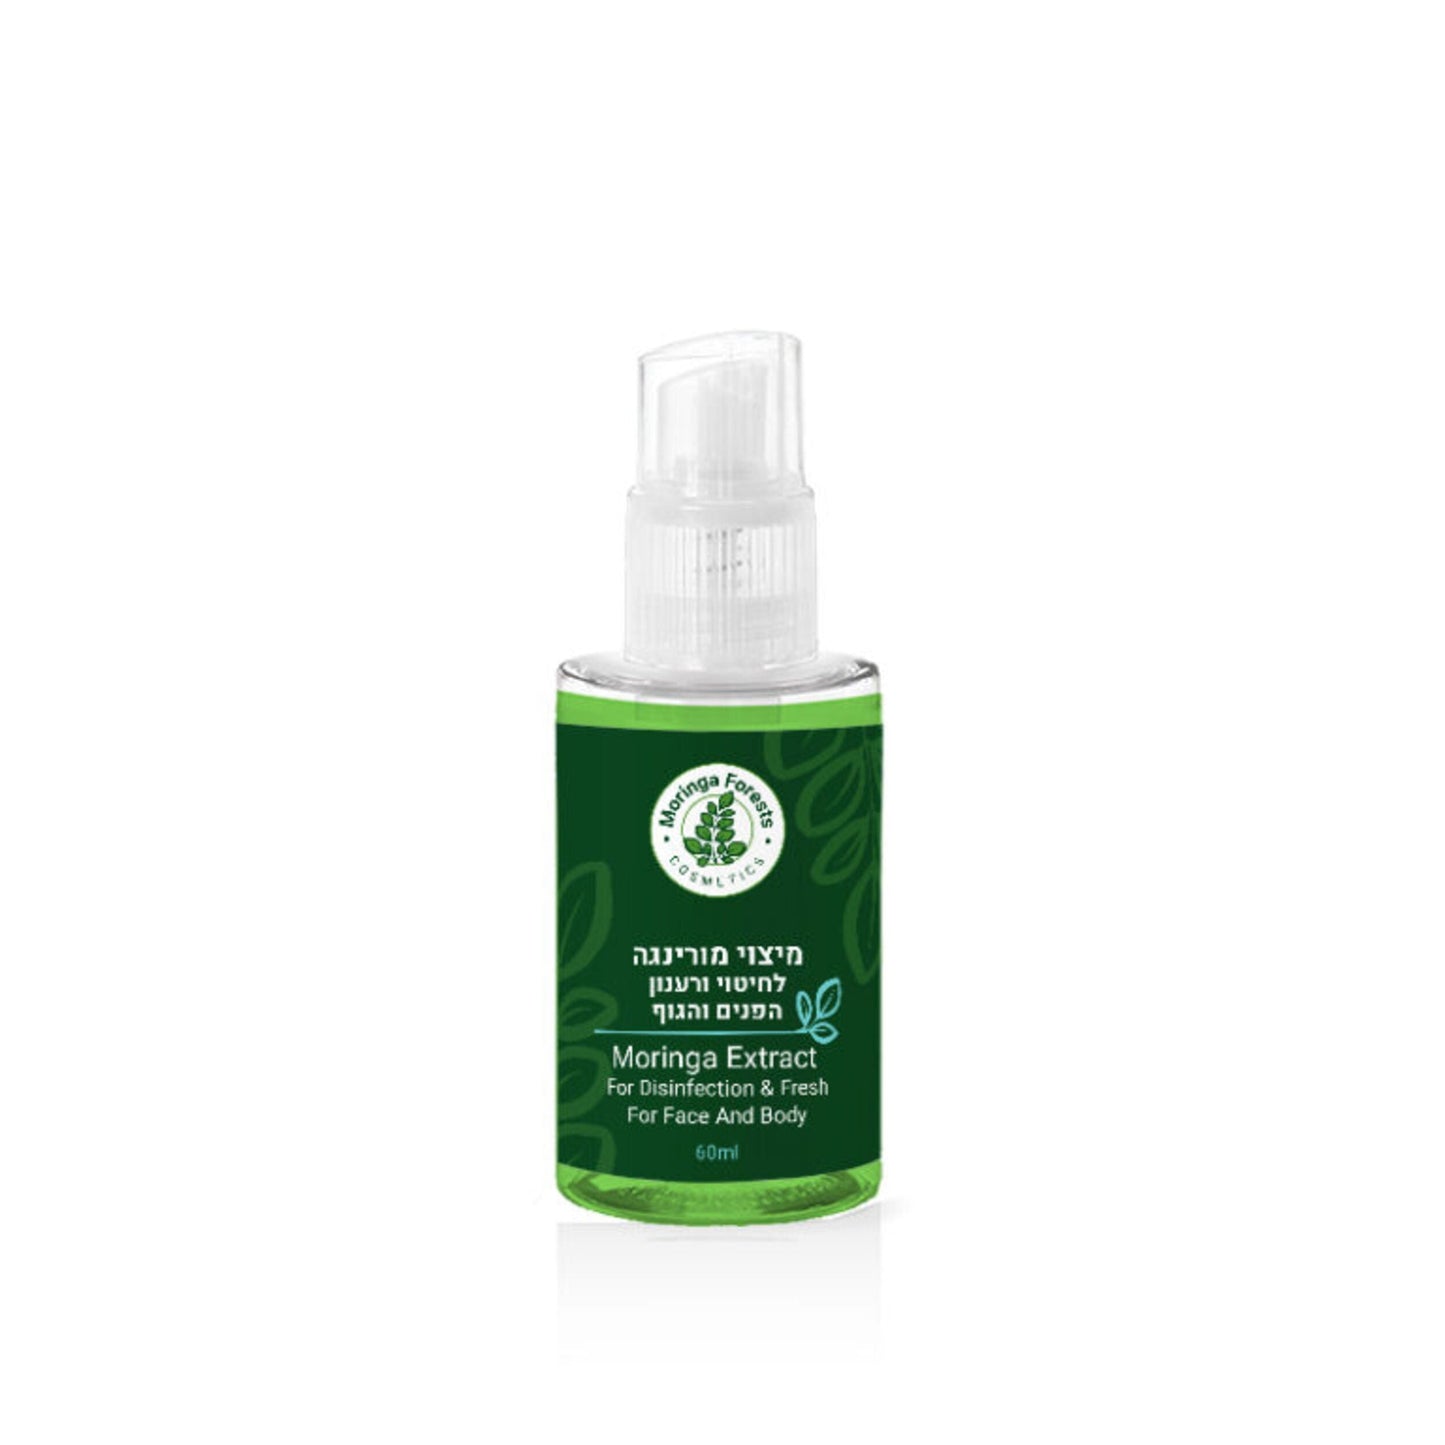 Pure Moringa Extract Face and Body Spray - moringa forests shop